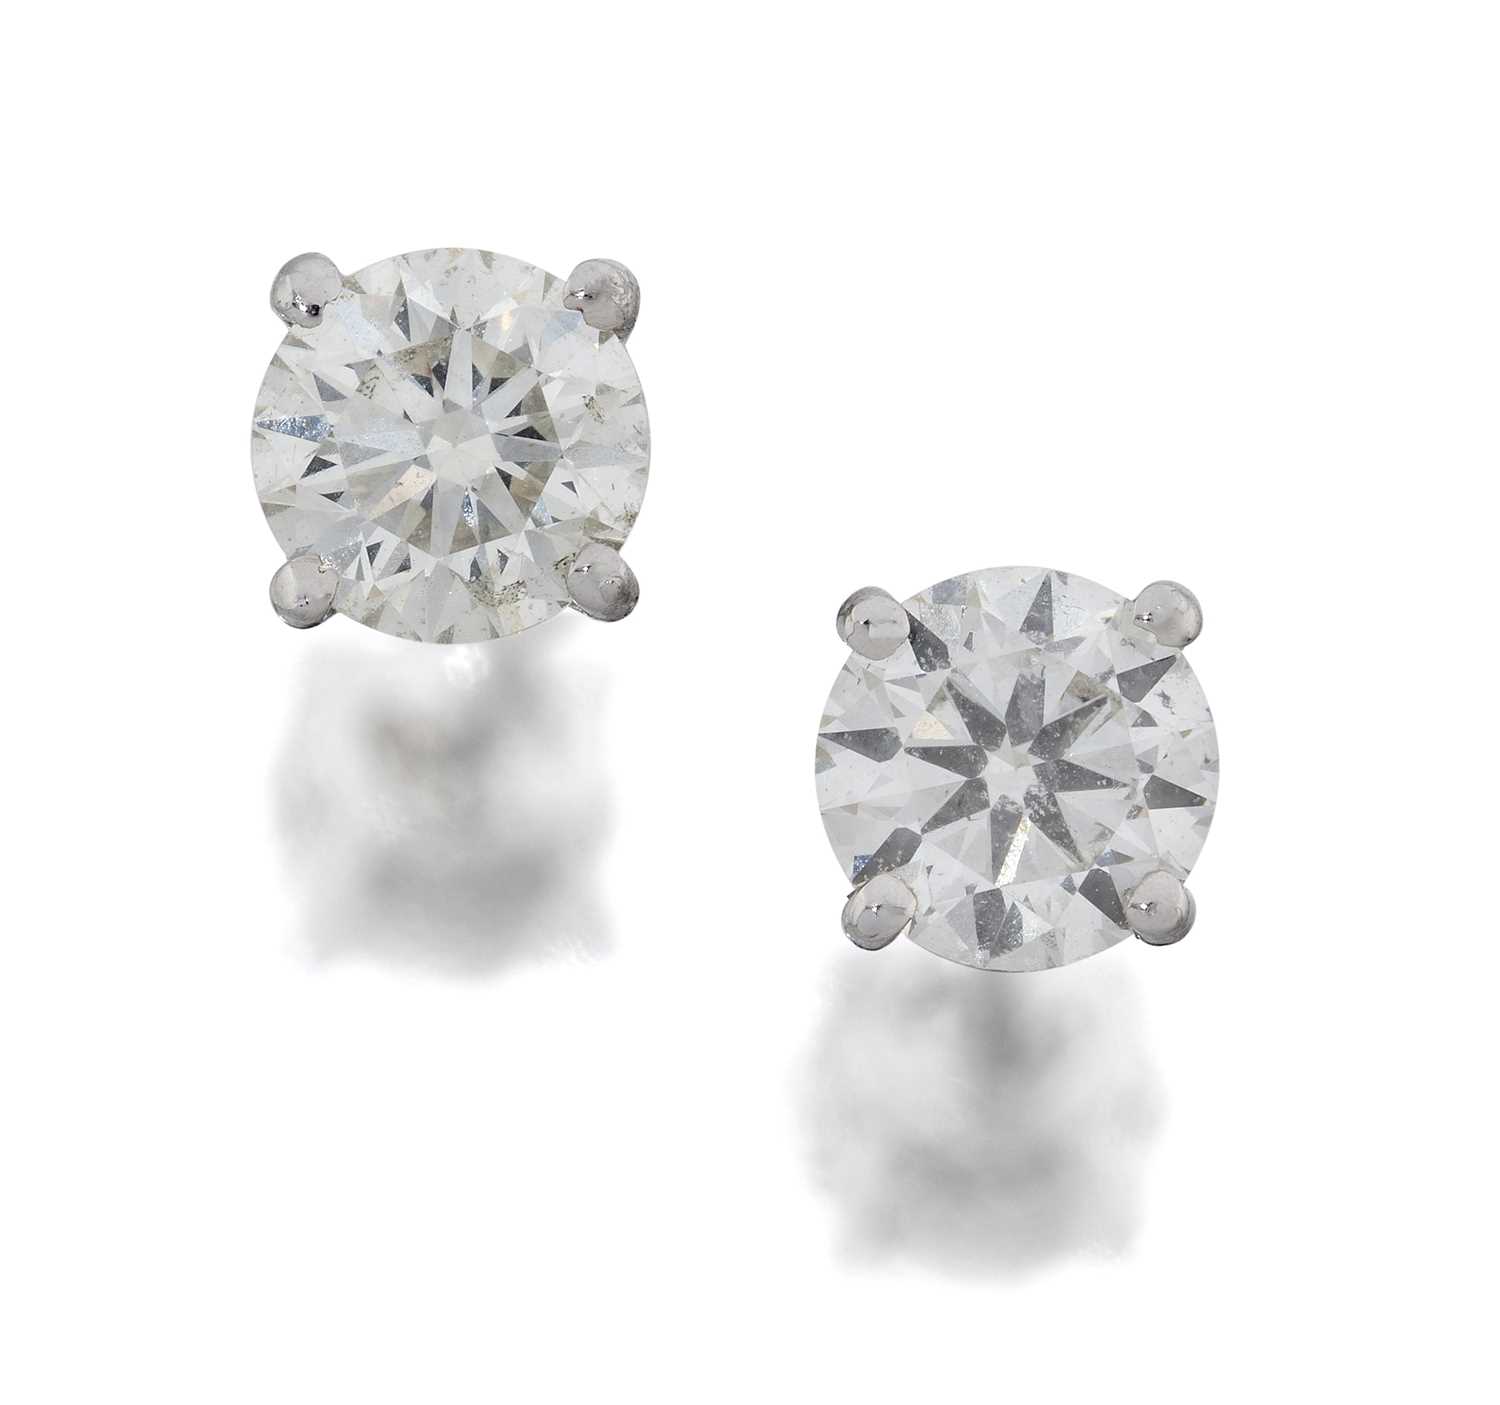 Lot 2029 - A Pair of Diamond Solitaire Earrings